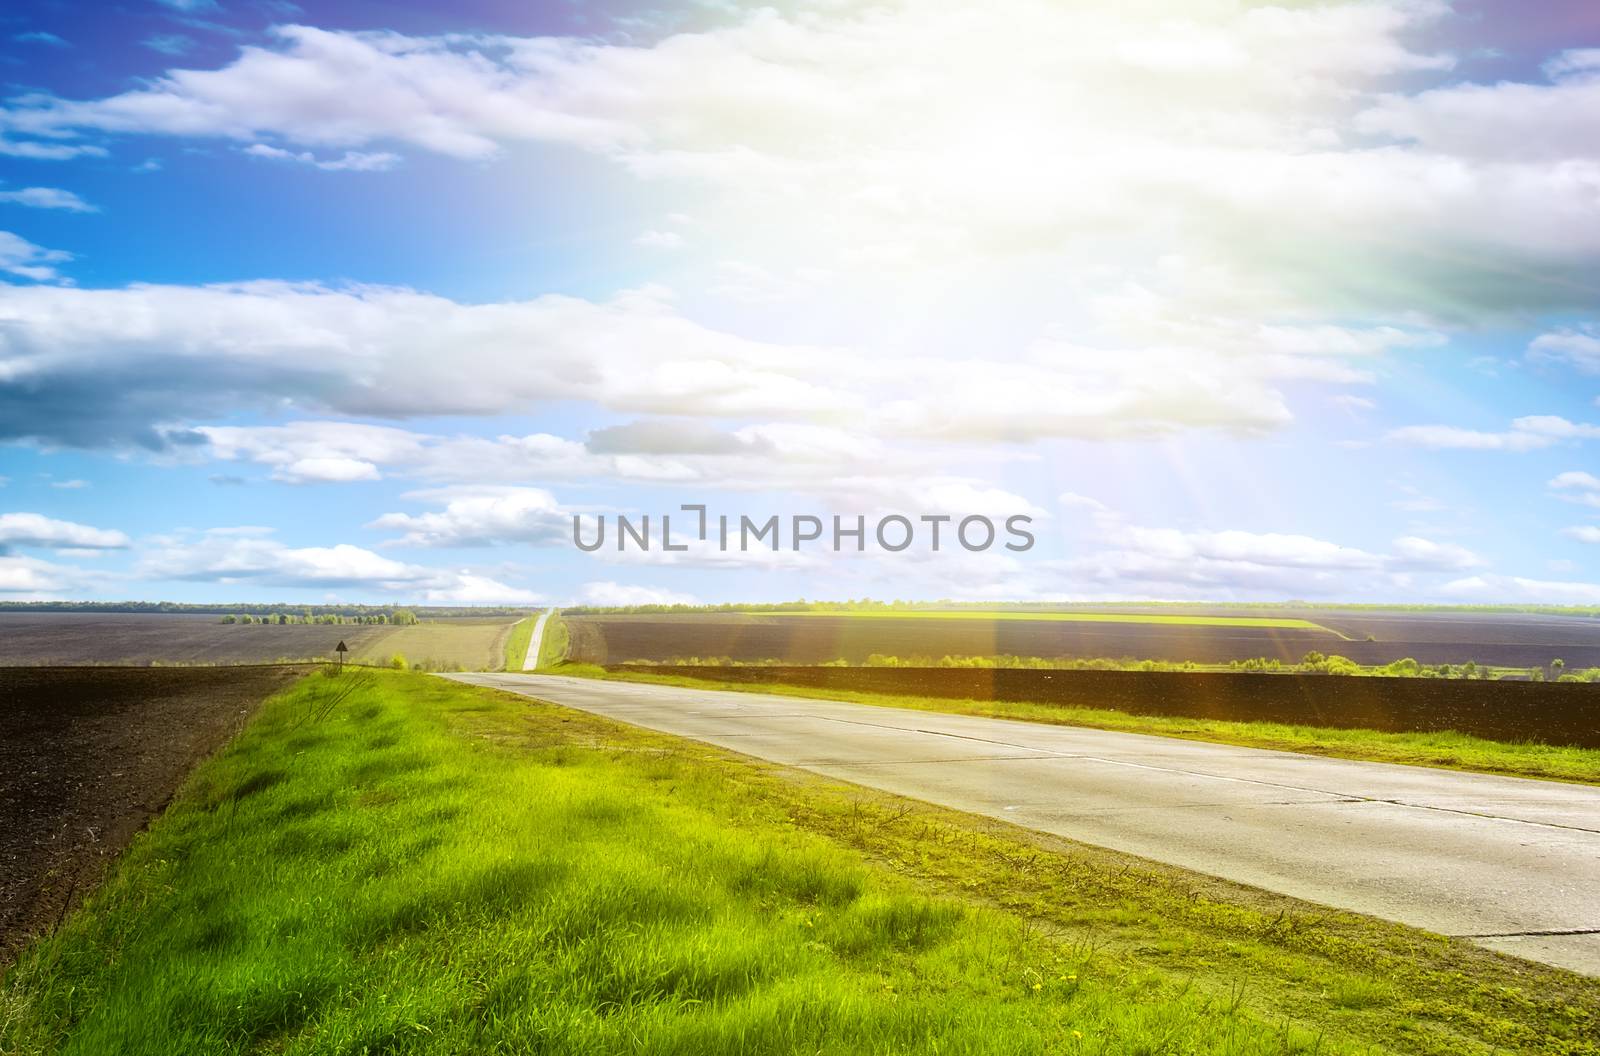 Highway in the hills on a clear sunny day with blue sky and green grass on the roadside